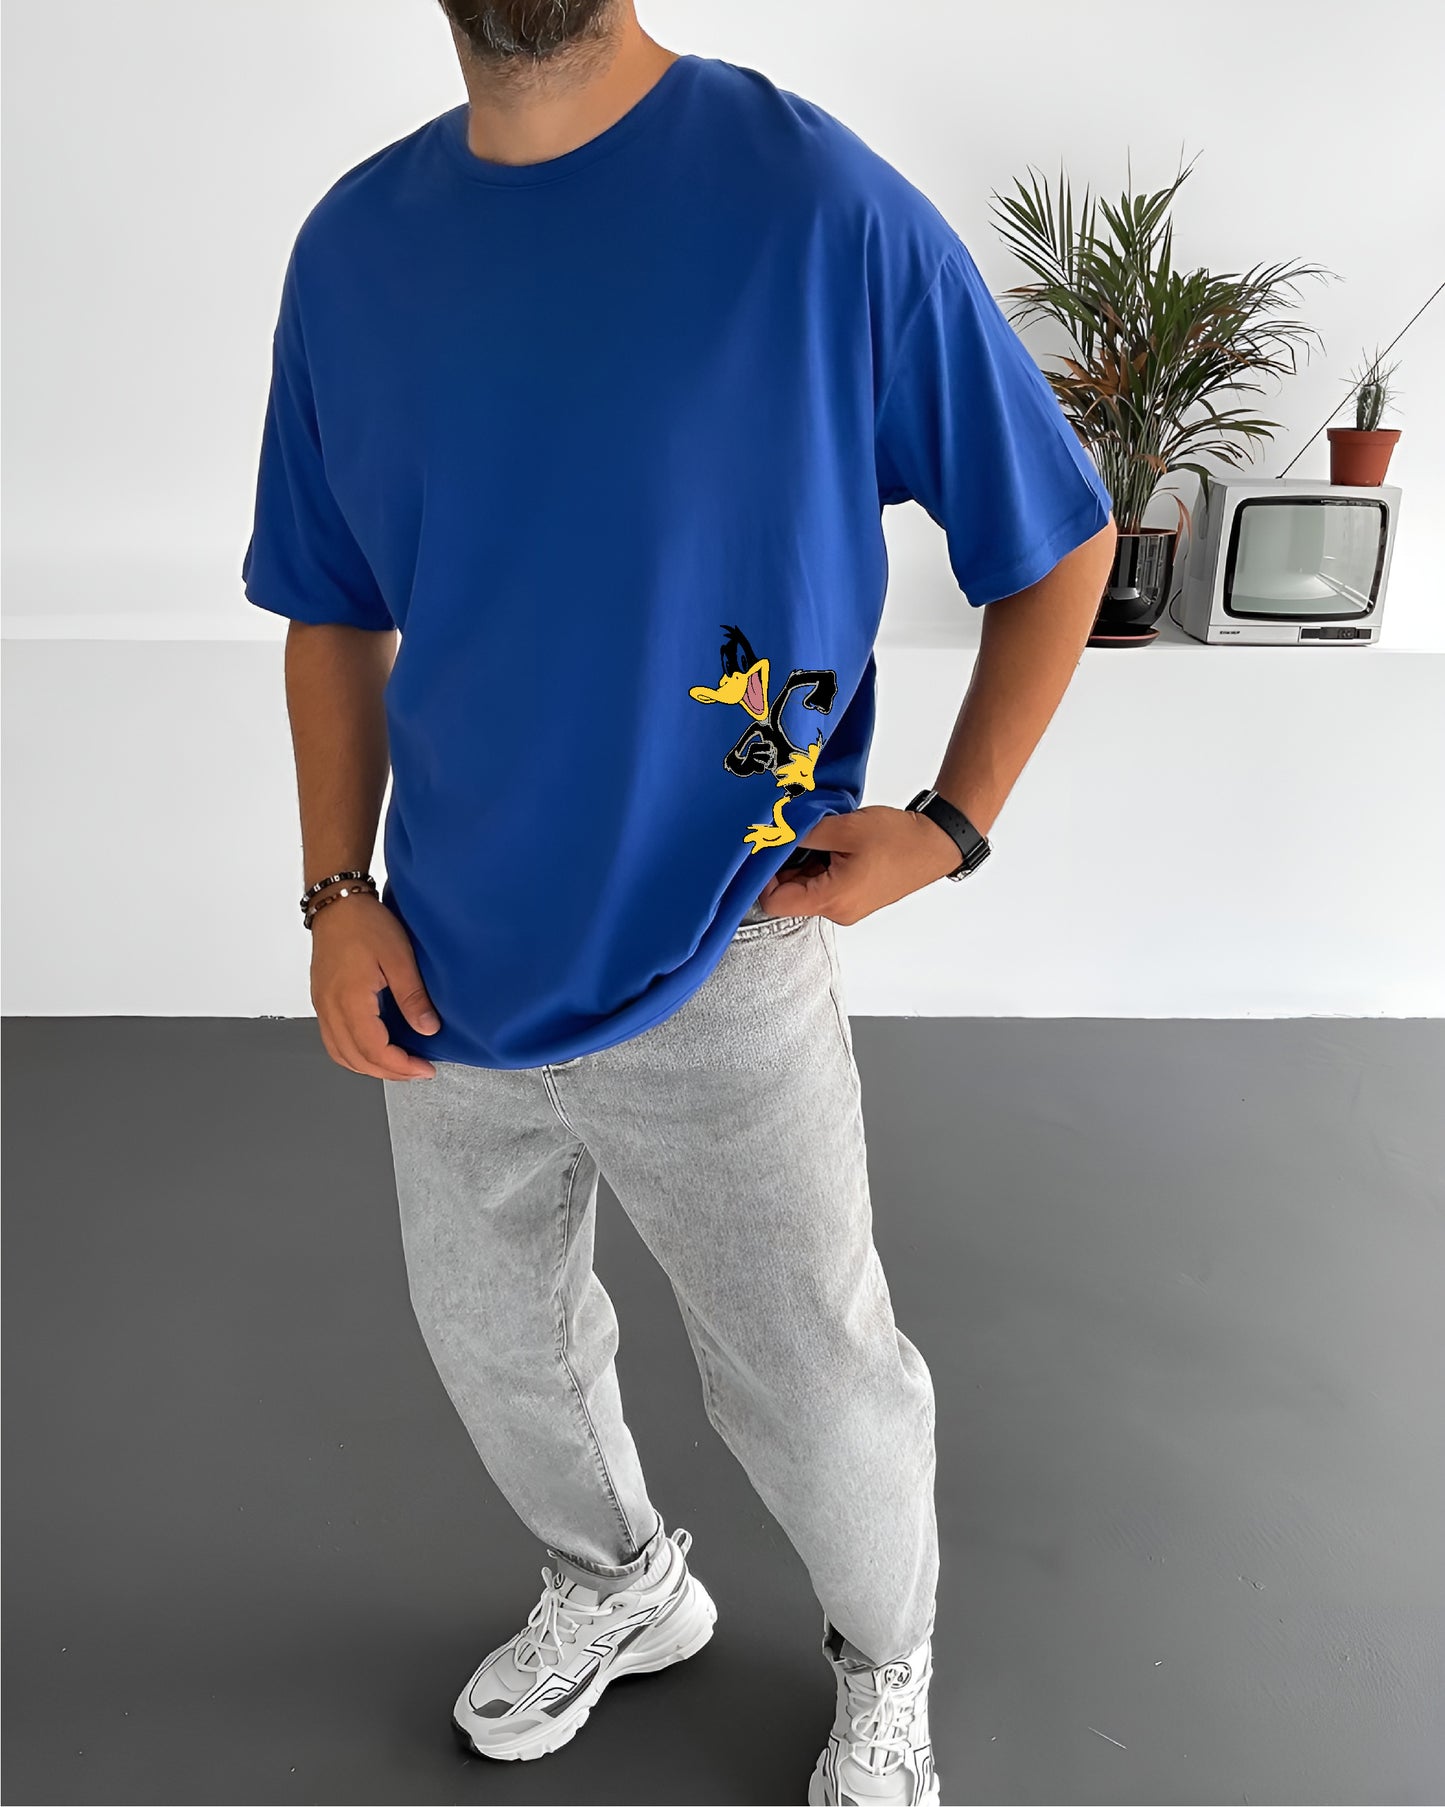 Royal Blue "What's the duck" Printed Oversize T-Shirt